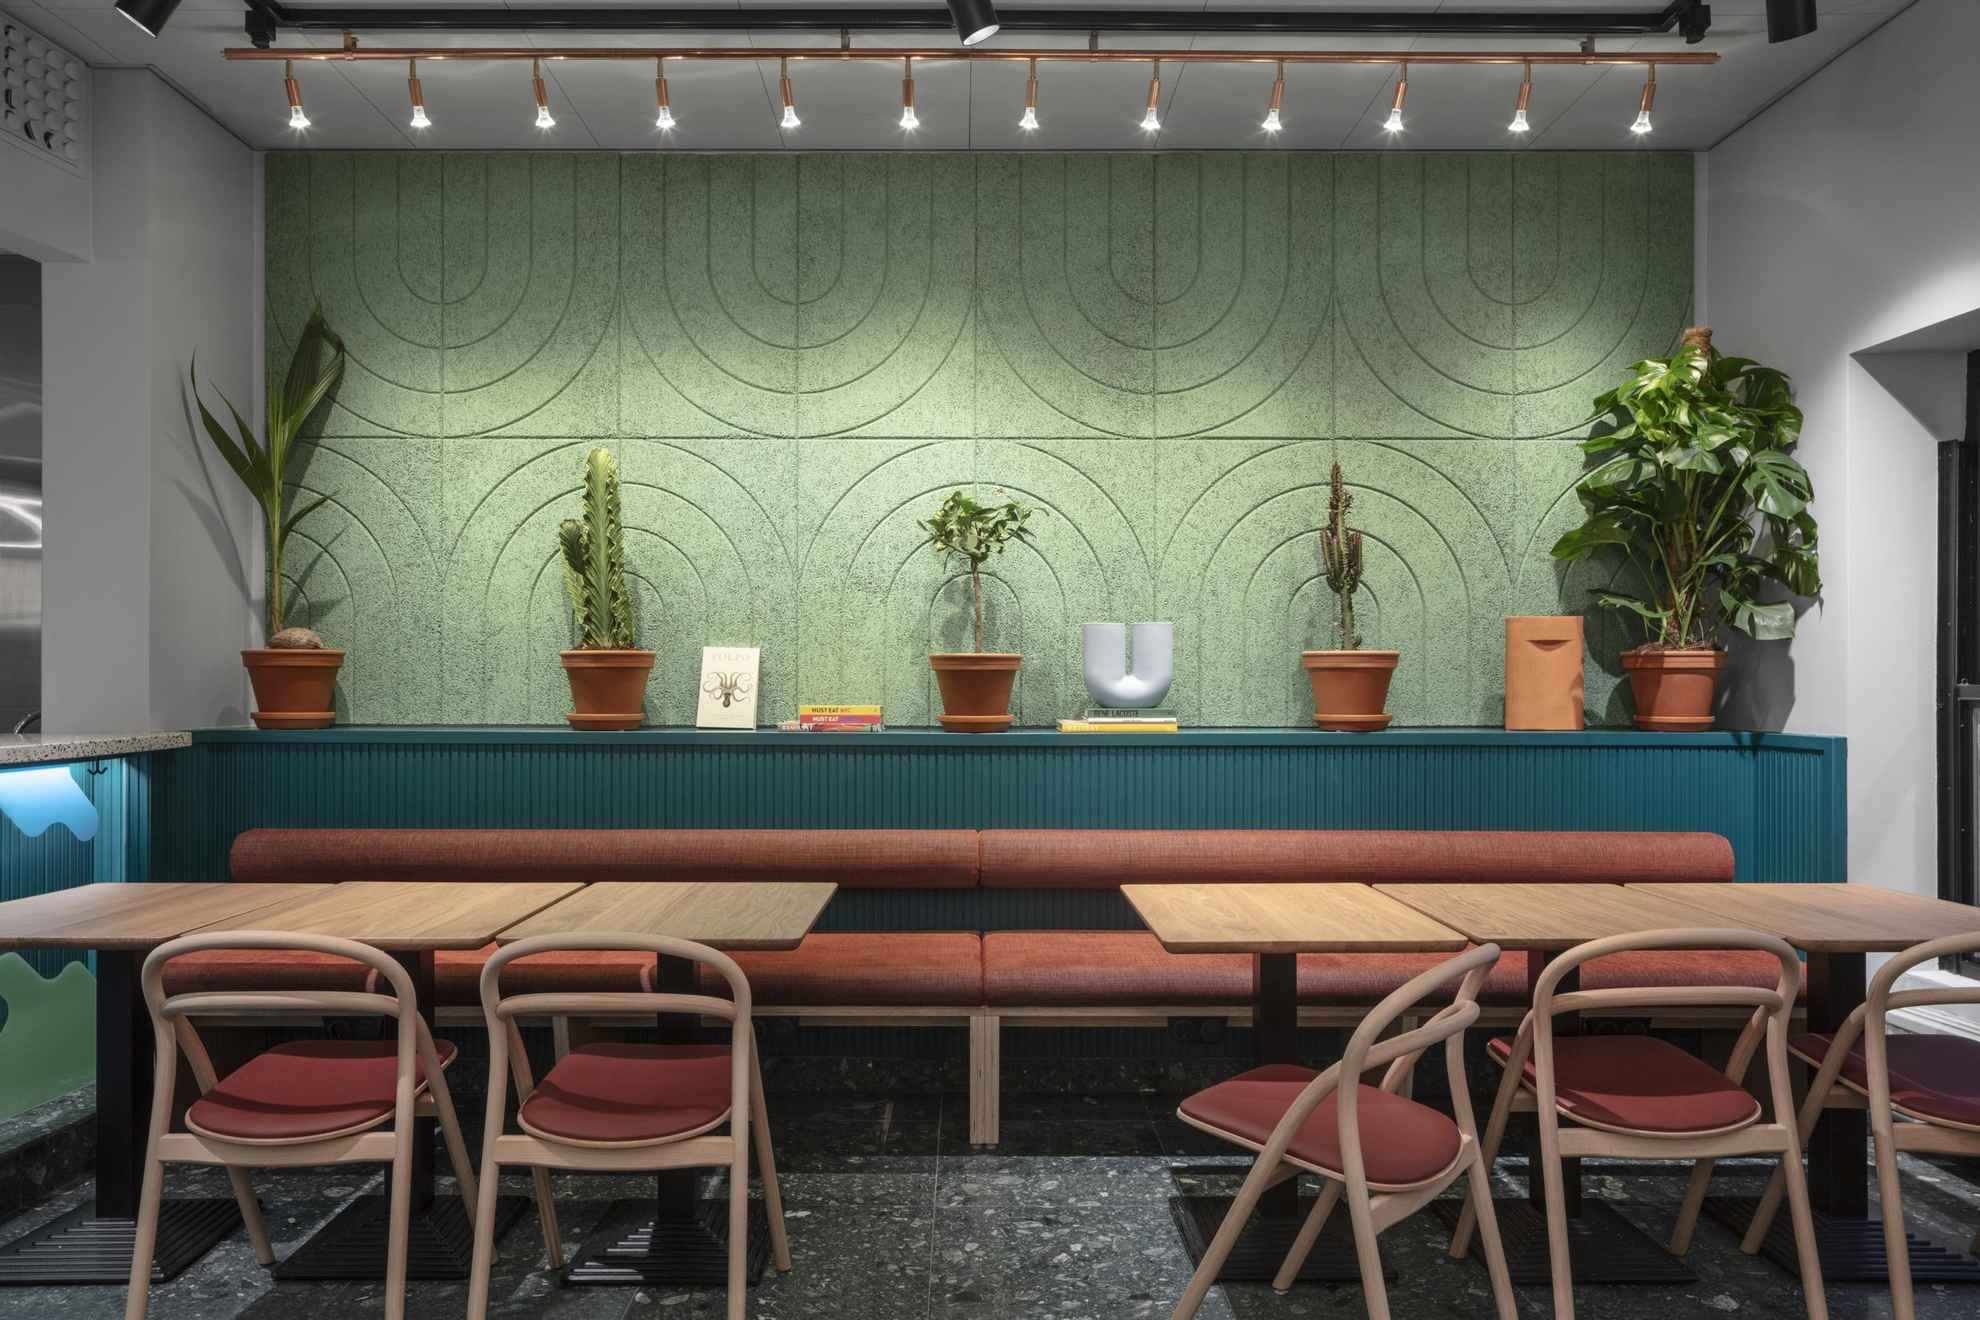 A seating area. A few plants are decorating the green and blue wall behind the table.